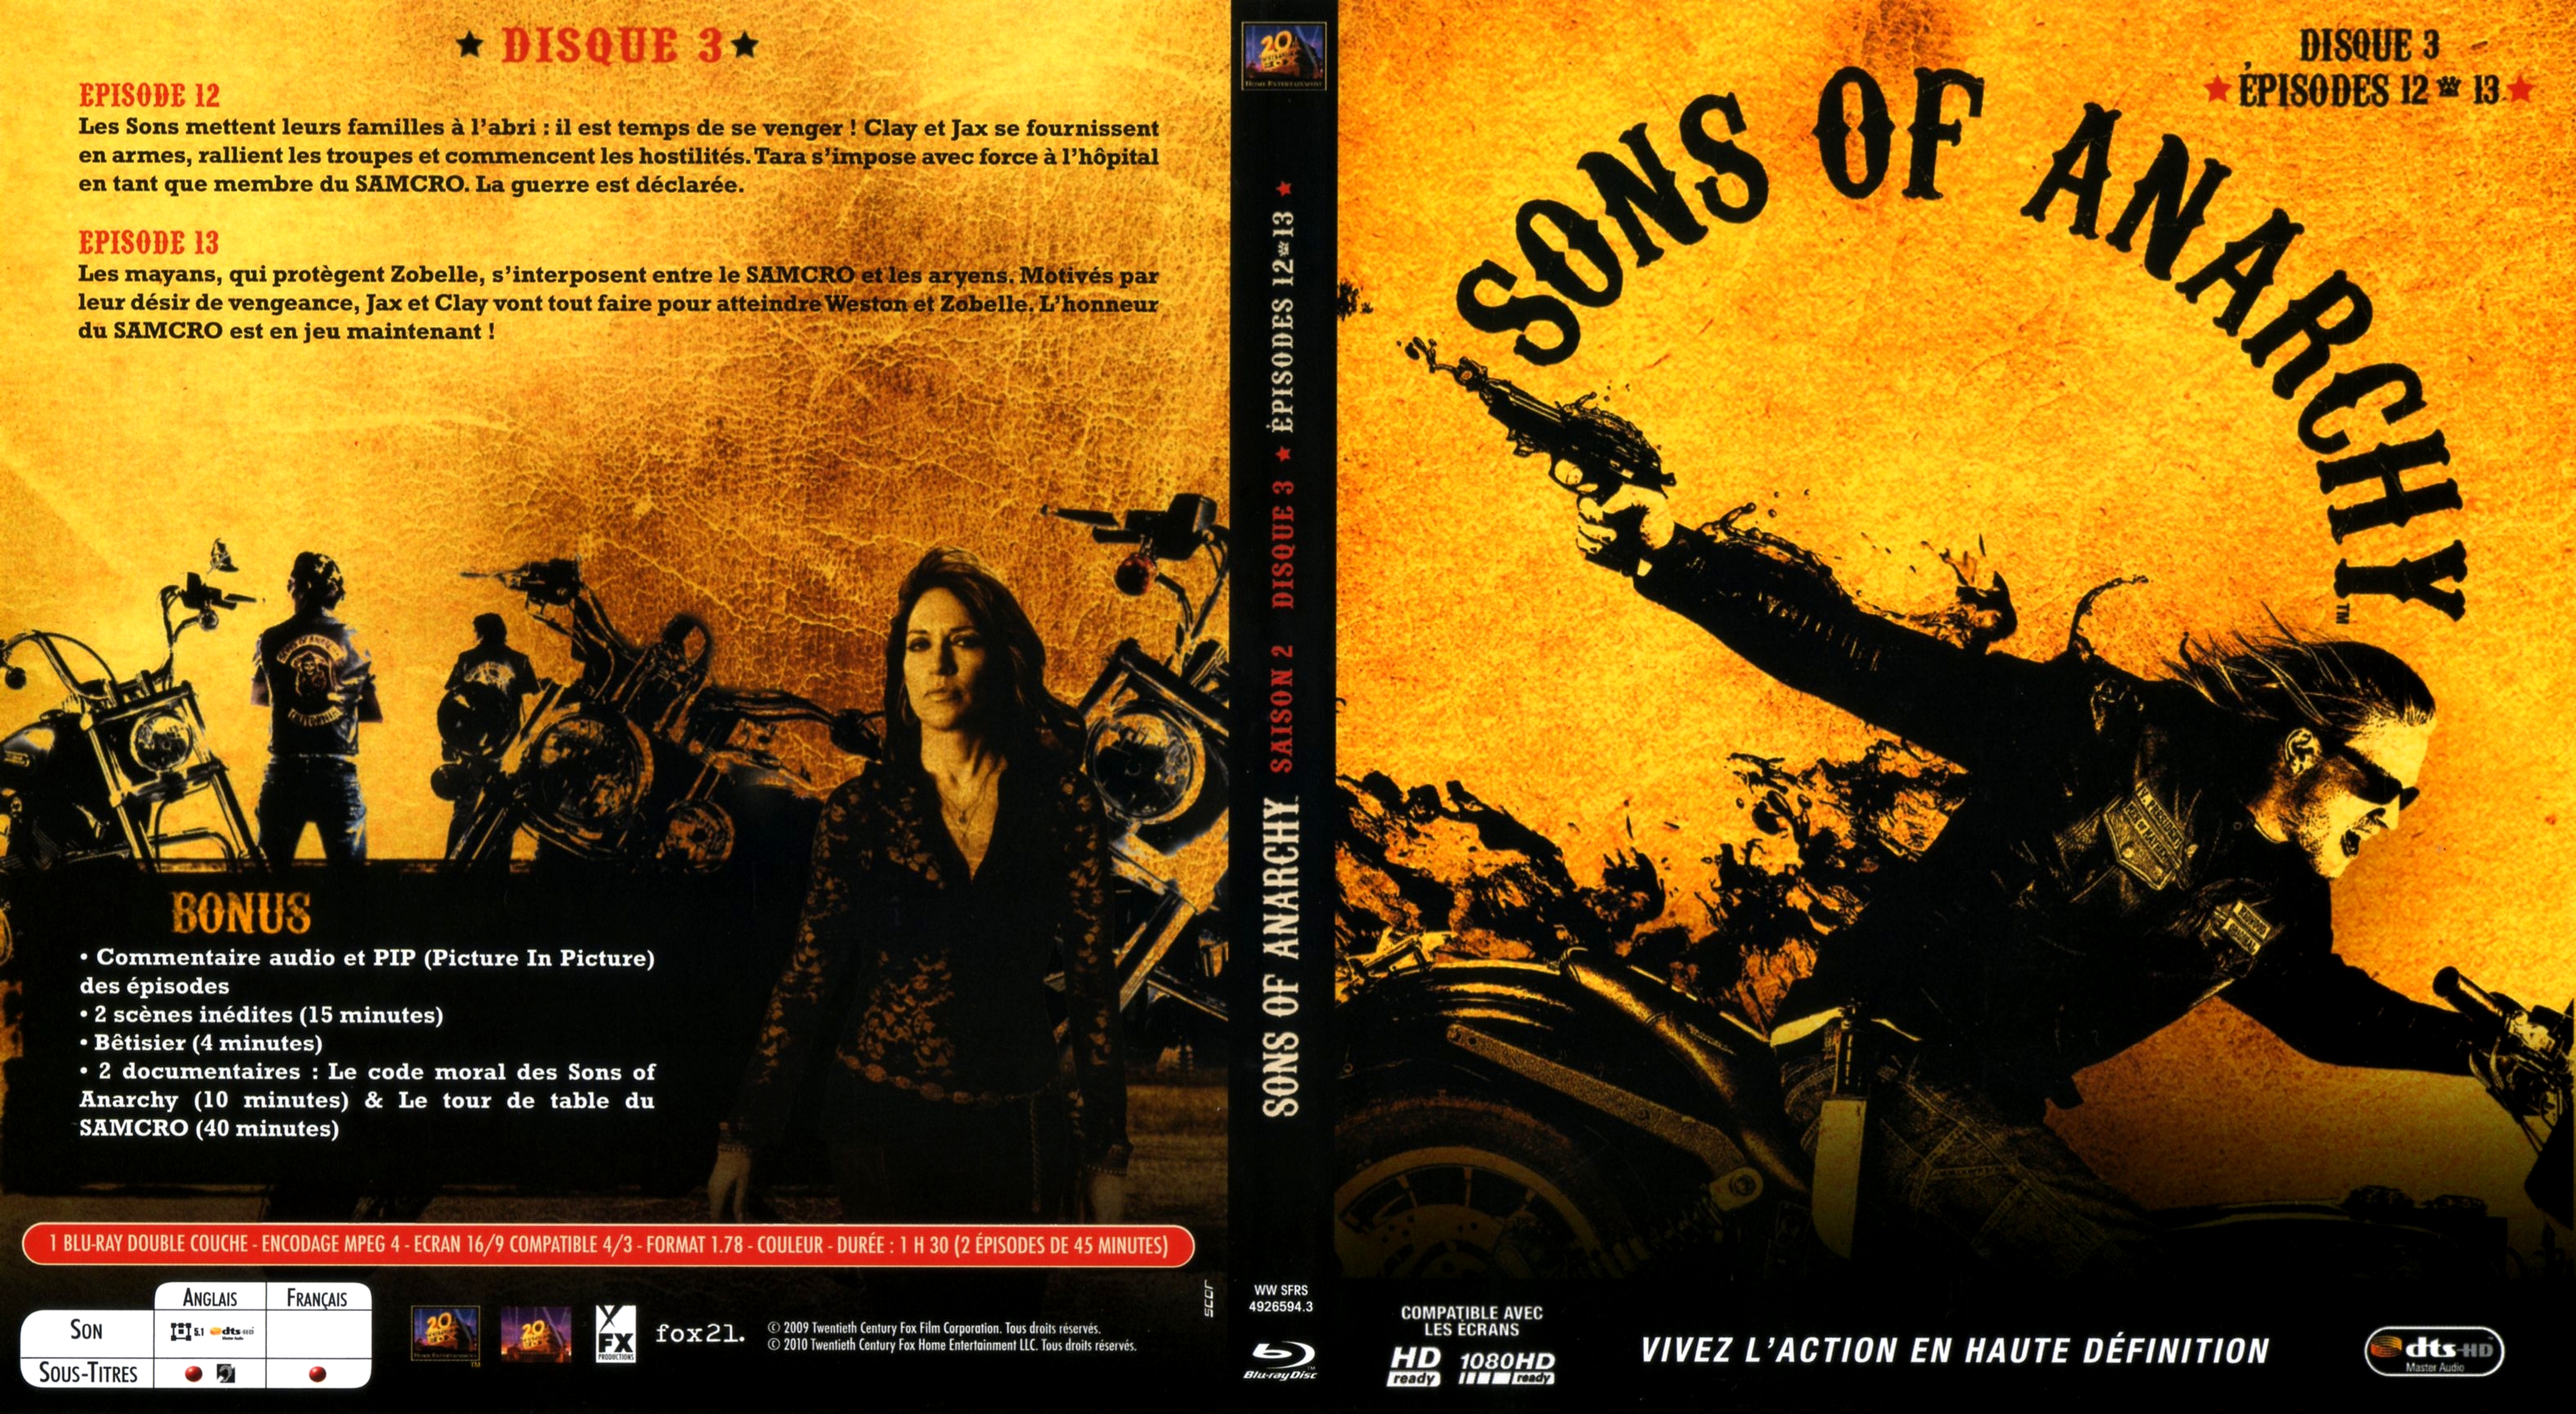 Jaquette DVD Sons of anarchy Saison 2 DISC 3 (BLU-RAY)